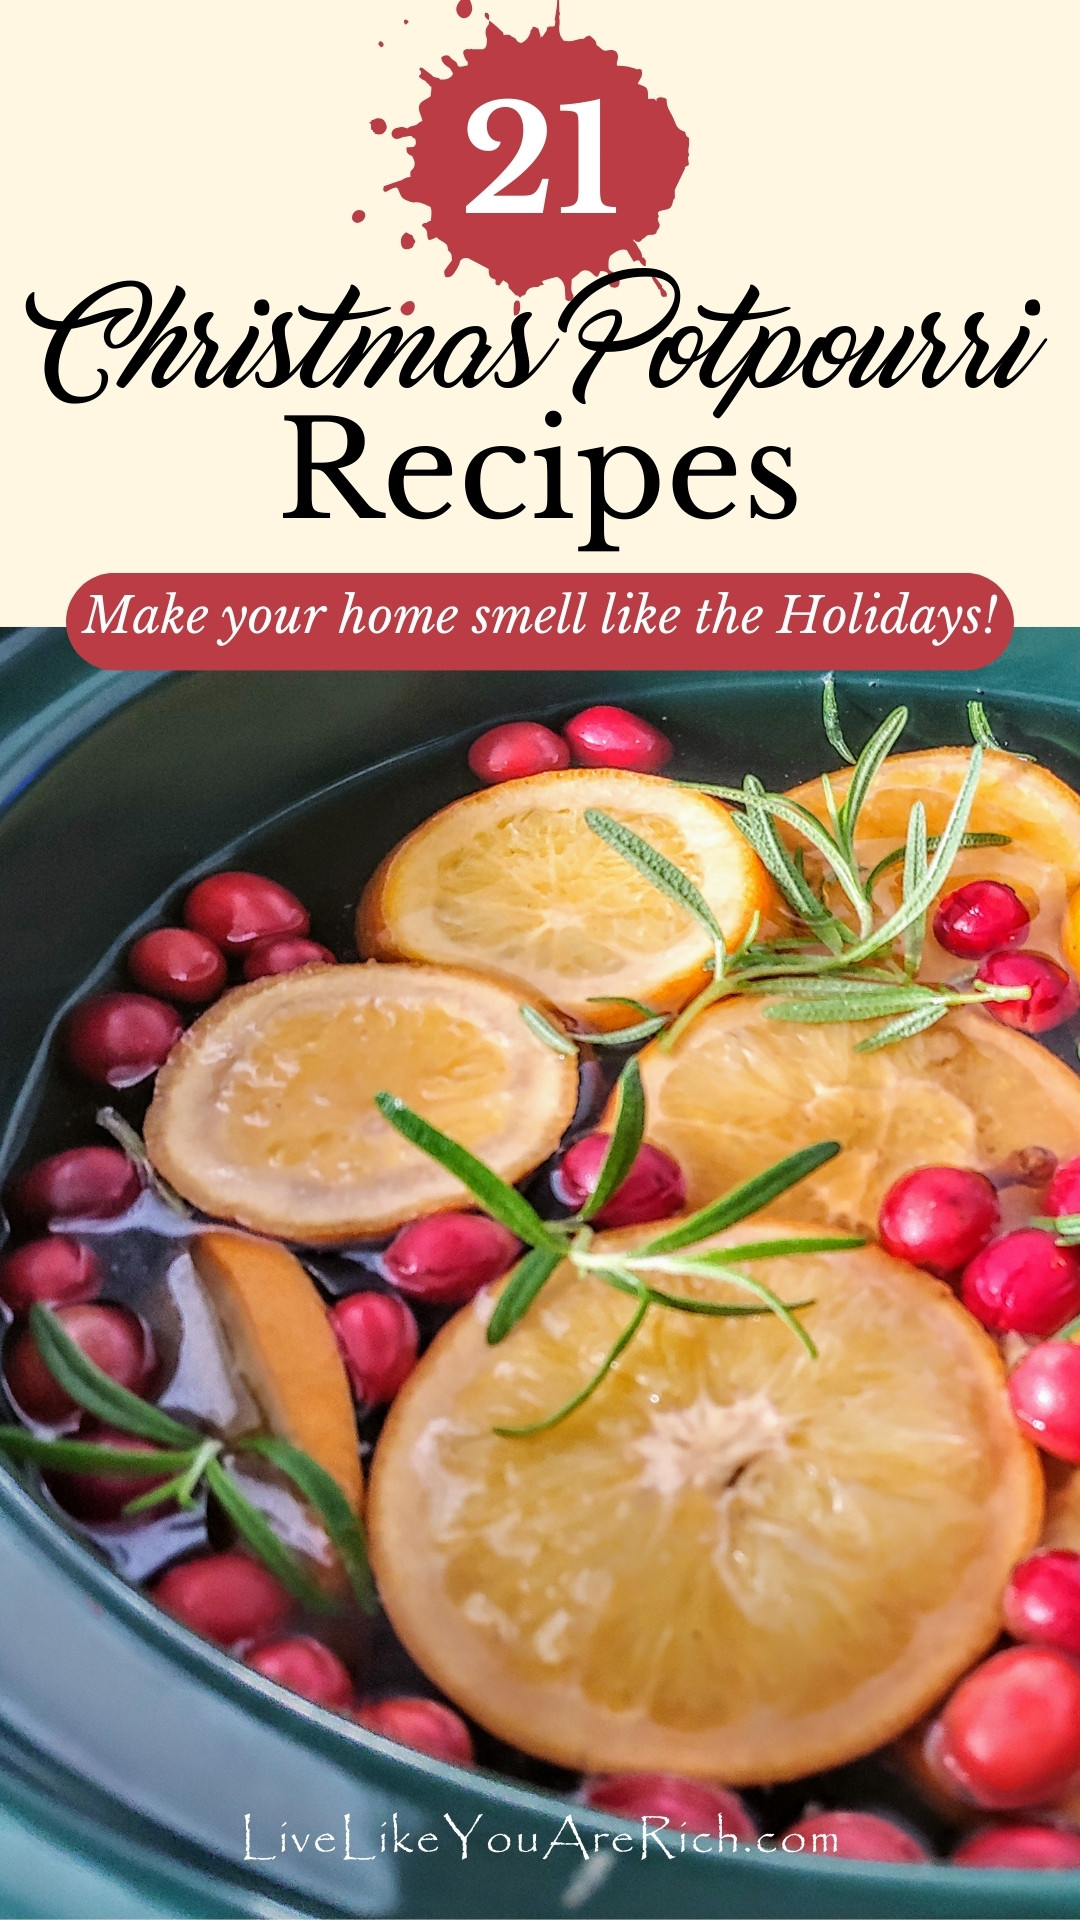 21 Best Christmas Potpourri Recipes - Make Your Home Smell Like the Holidays